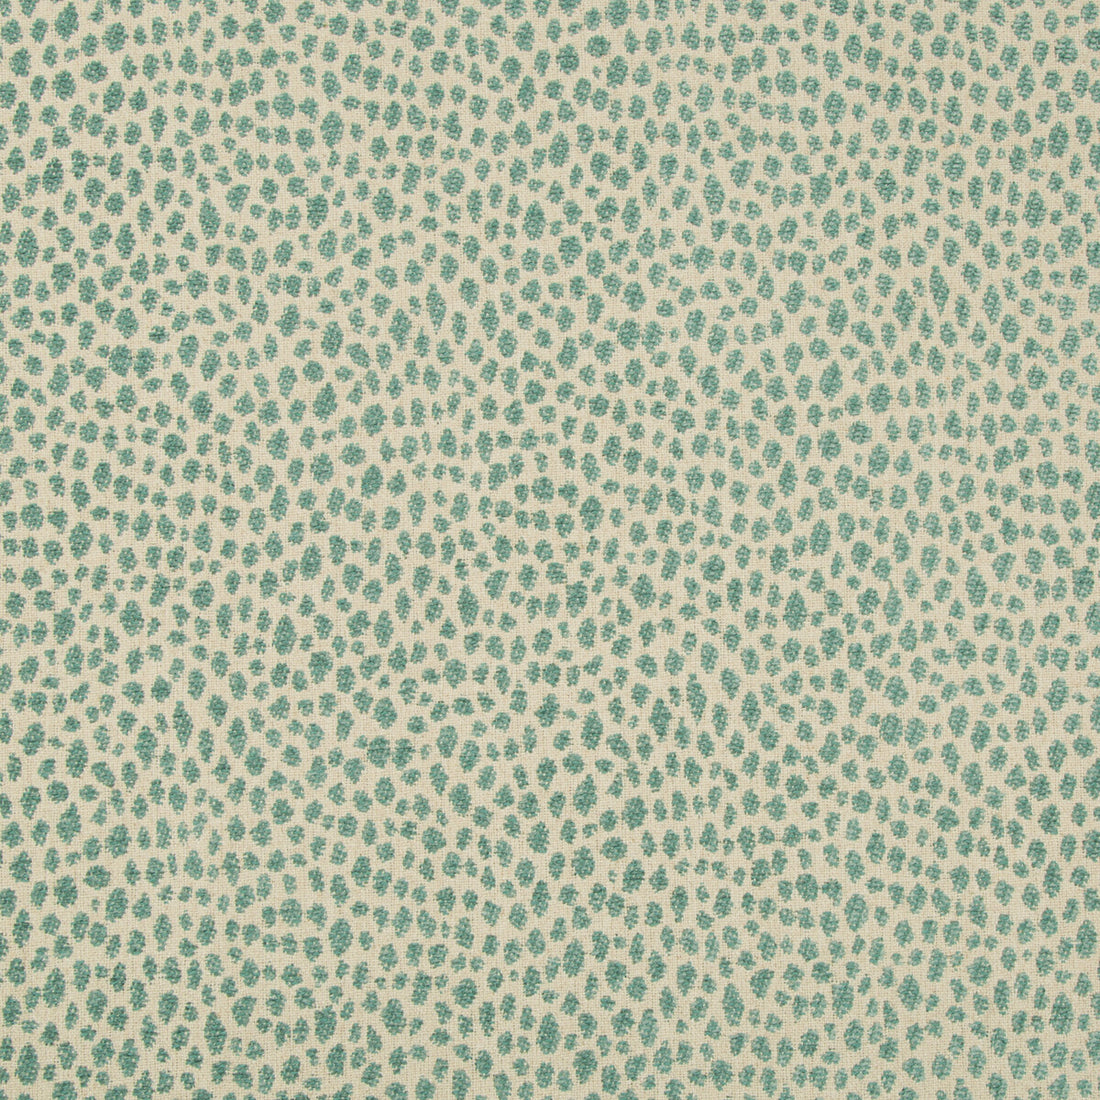 Mago fabric in lagoon color - pattern 2017147.13.0 - by Lee Jofa in the Merkato collection